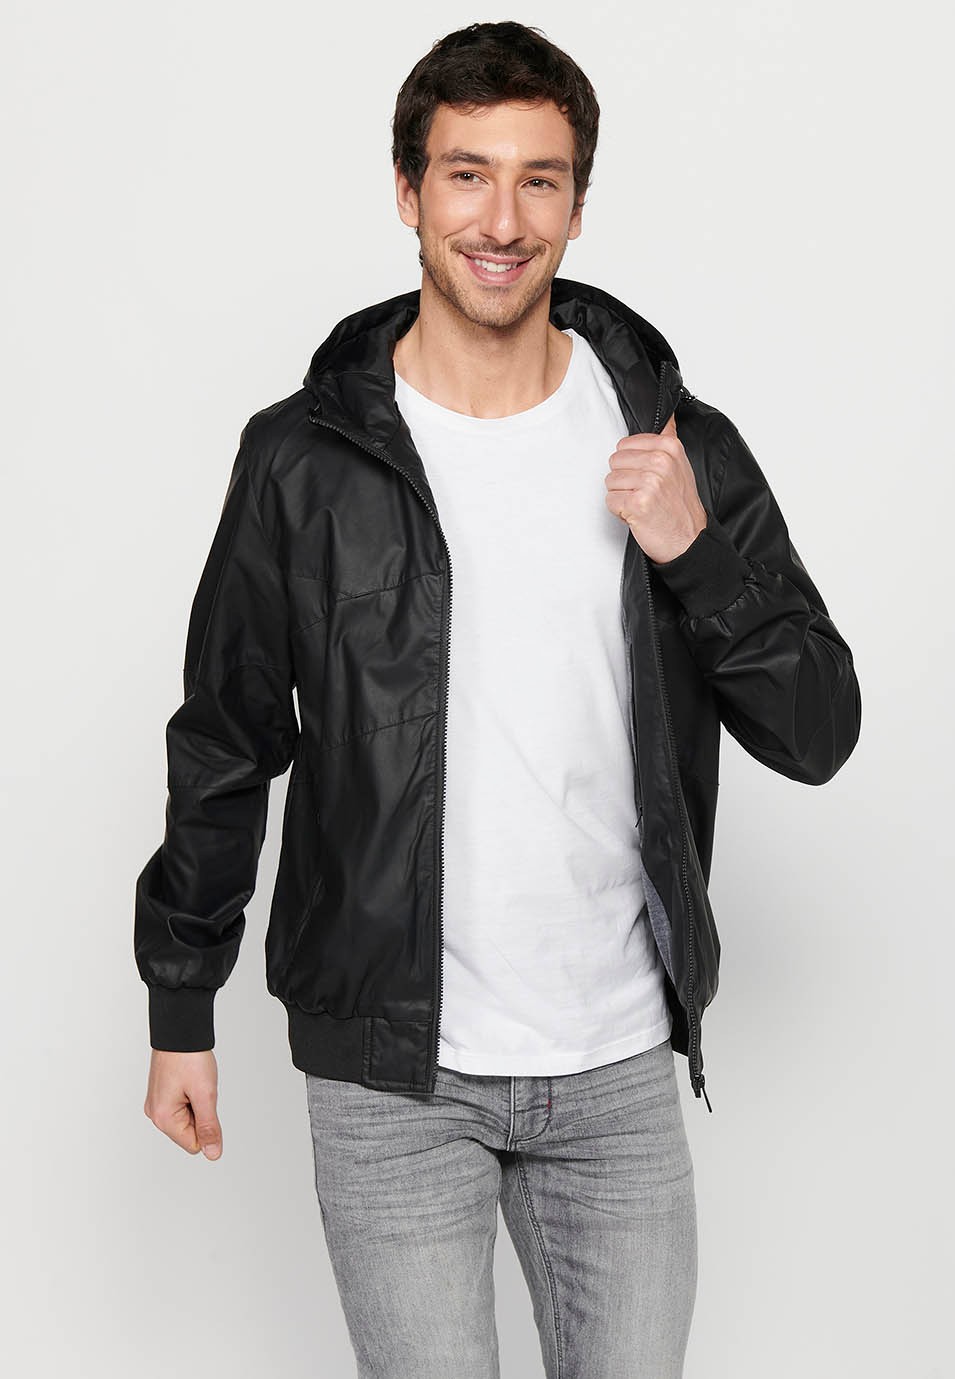 Leather-effect jacket with front zipper closure and hooded collar in black for Men 6